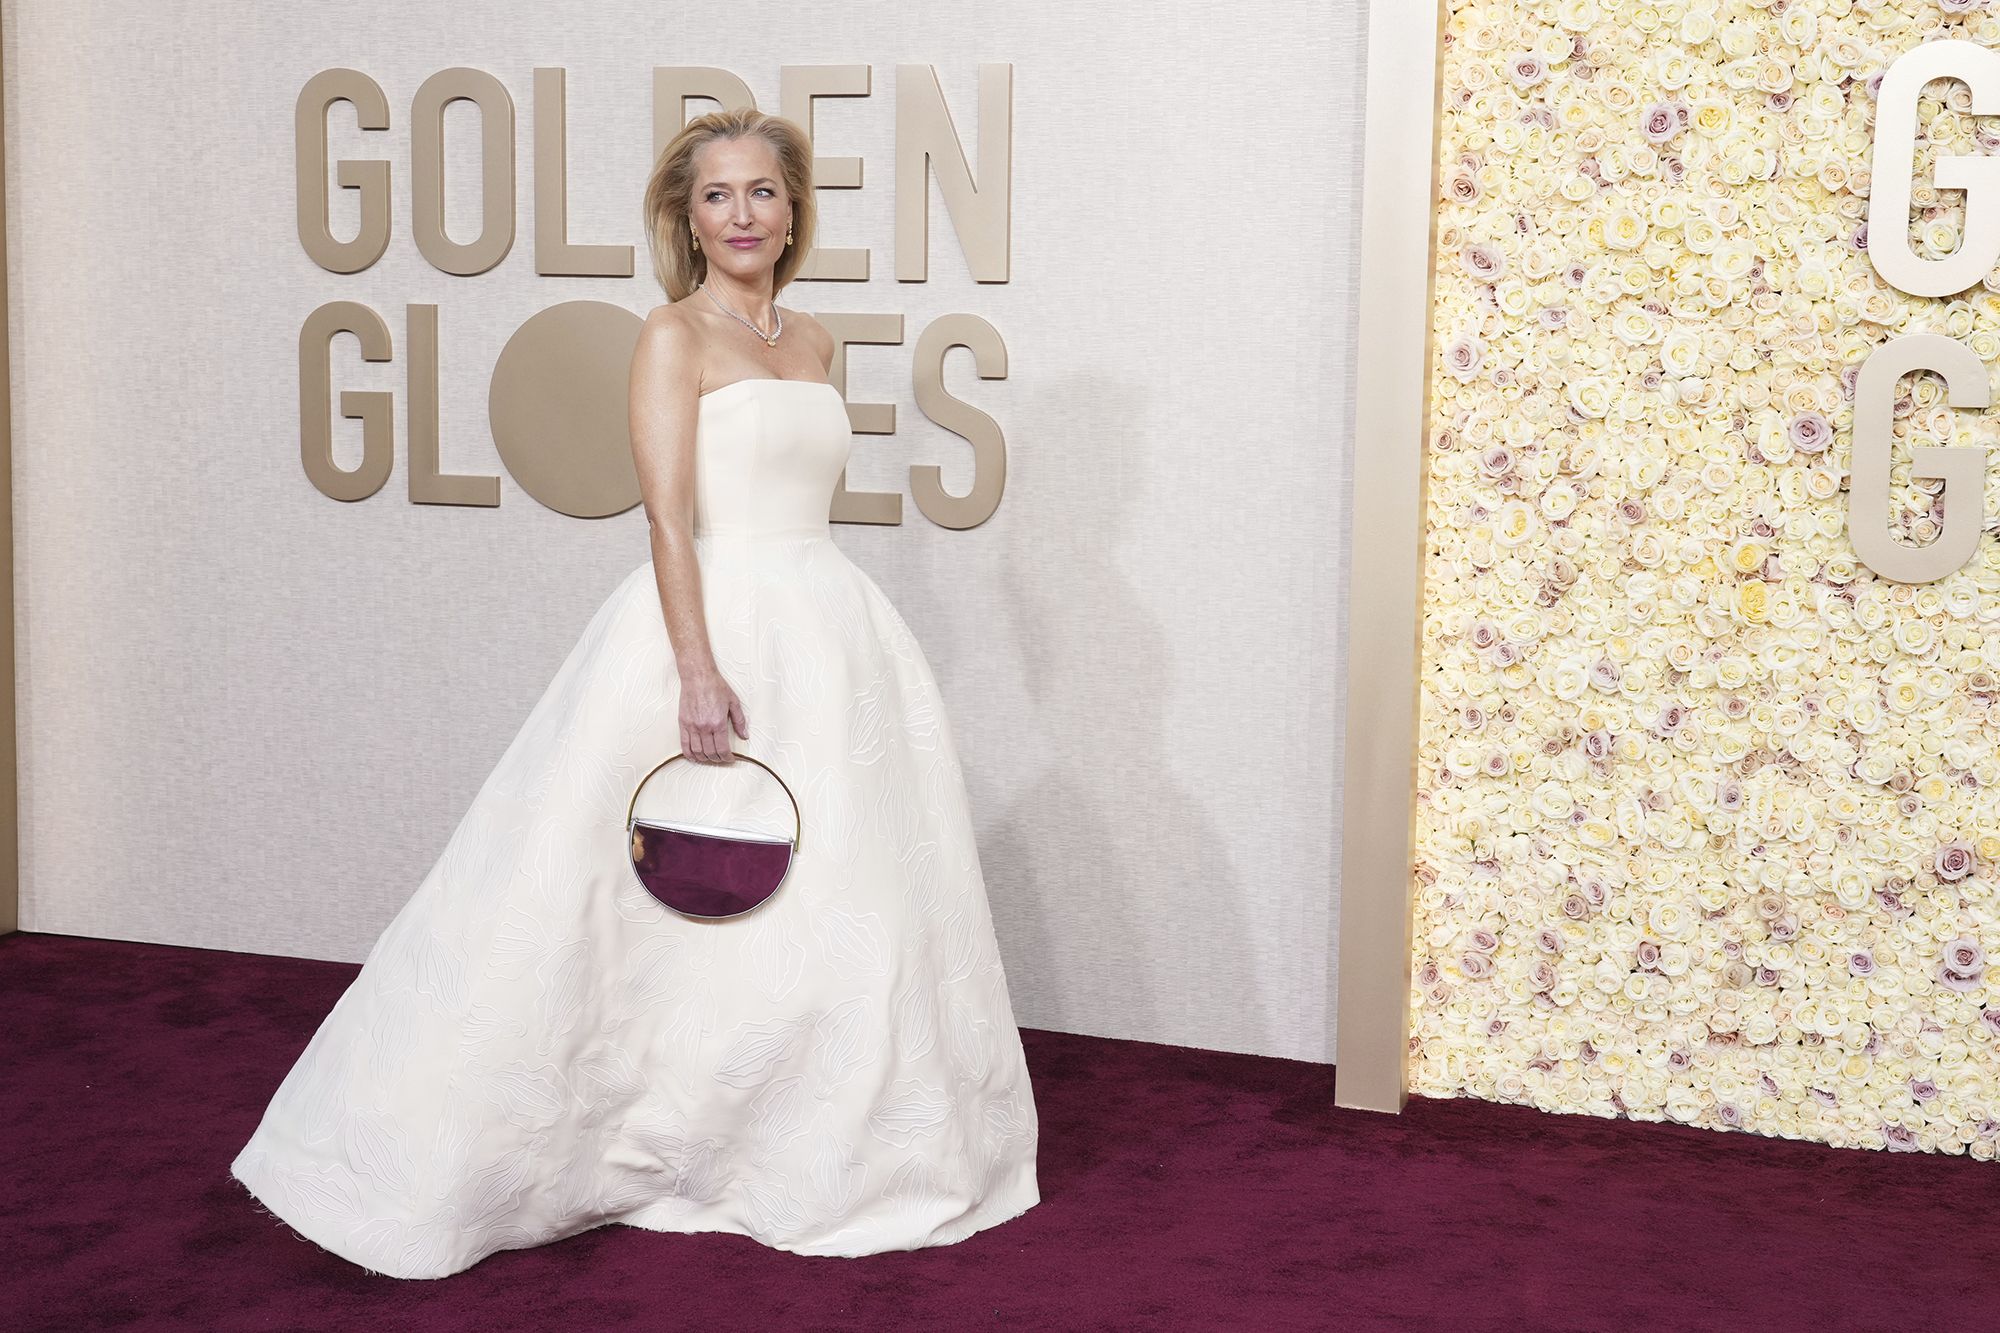 Gillian Anderson’s Dress: The Talk of the Golden Globe Red Carpet